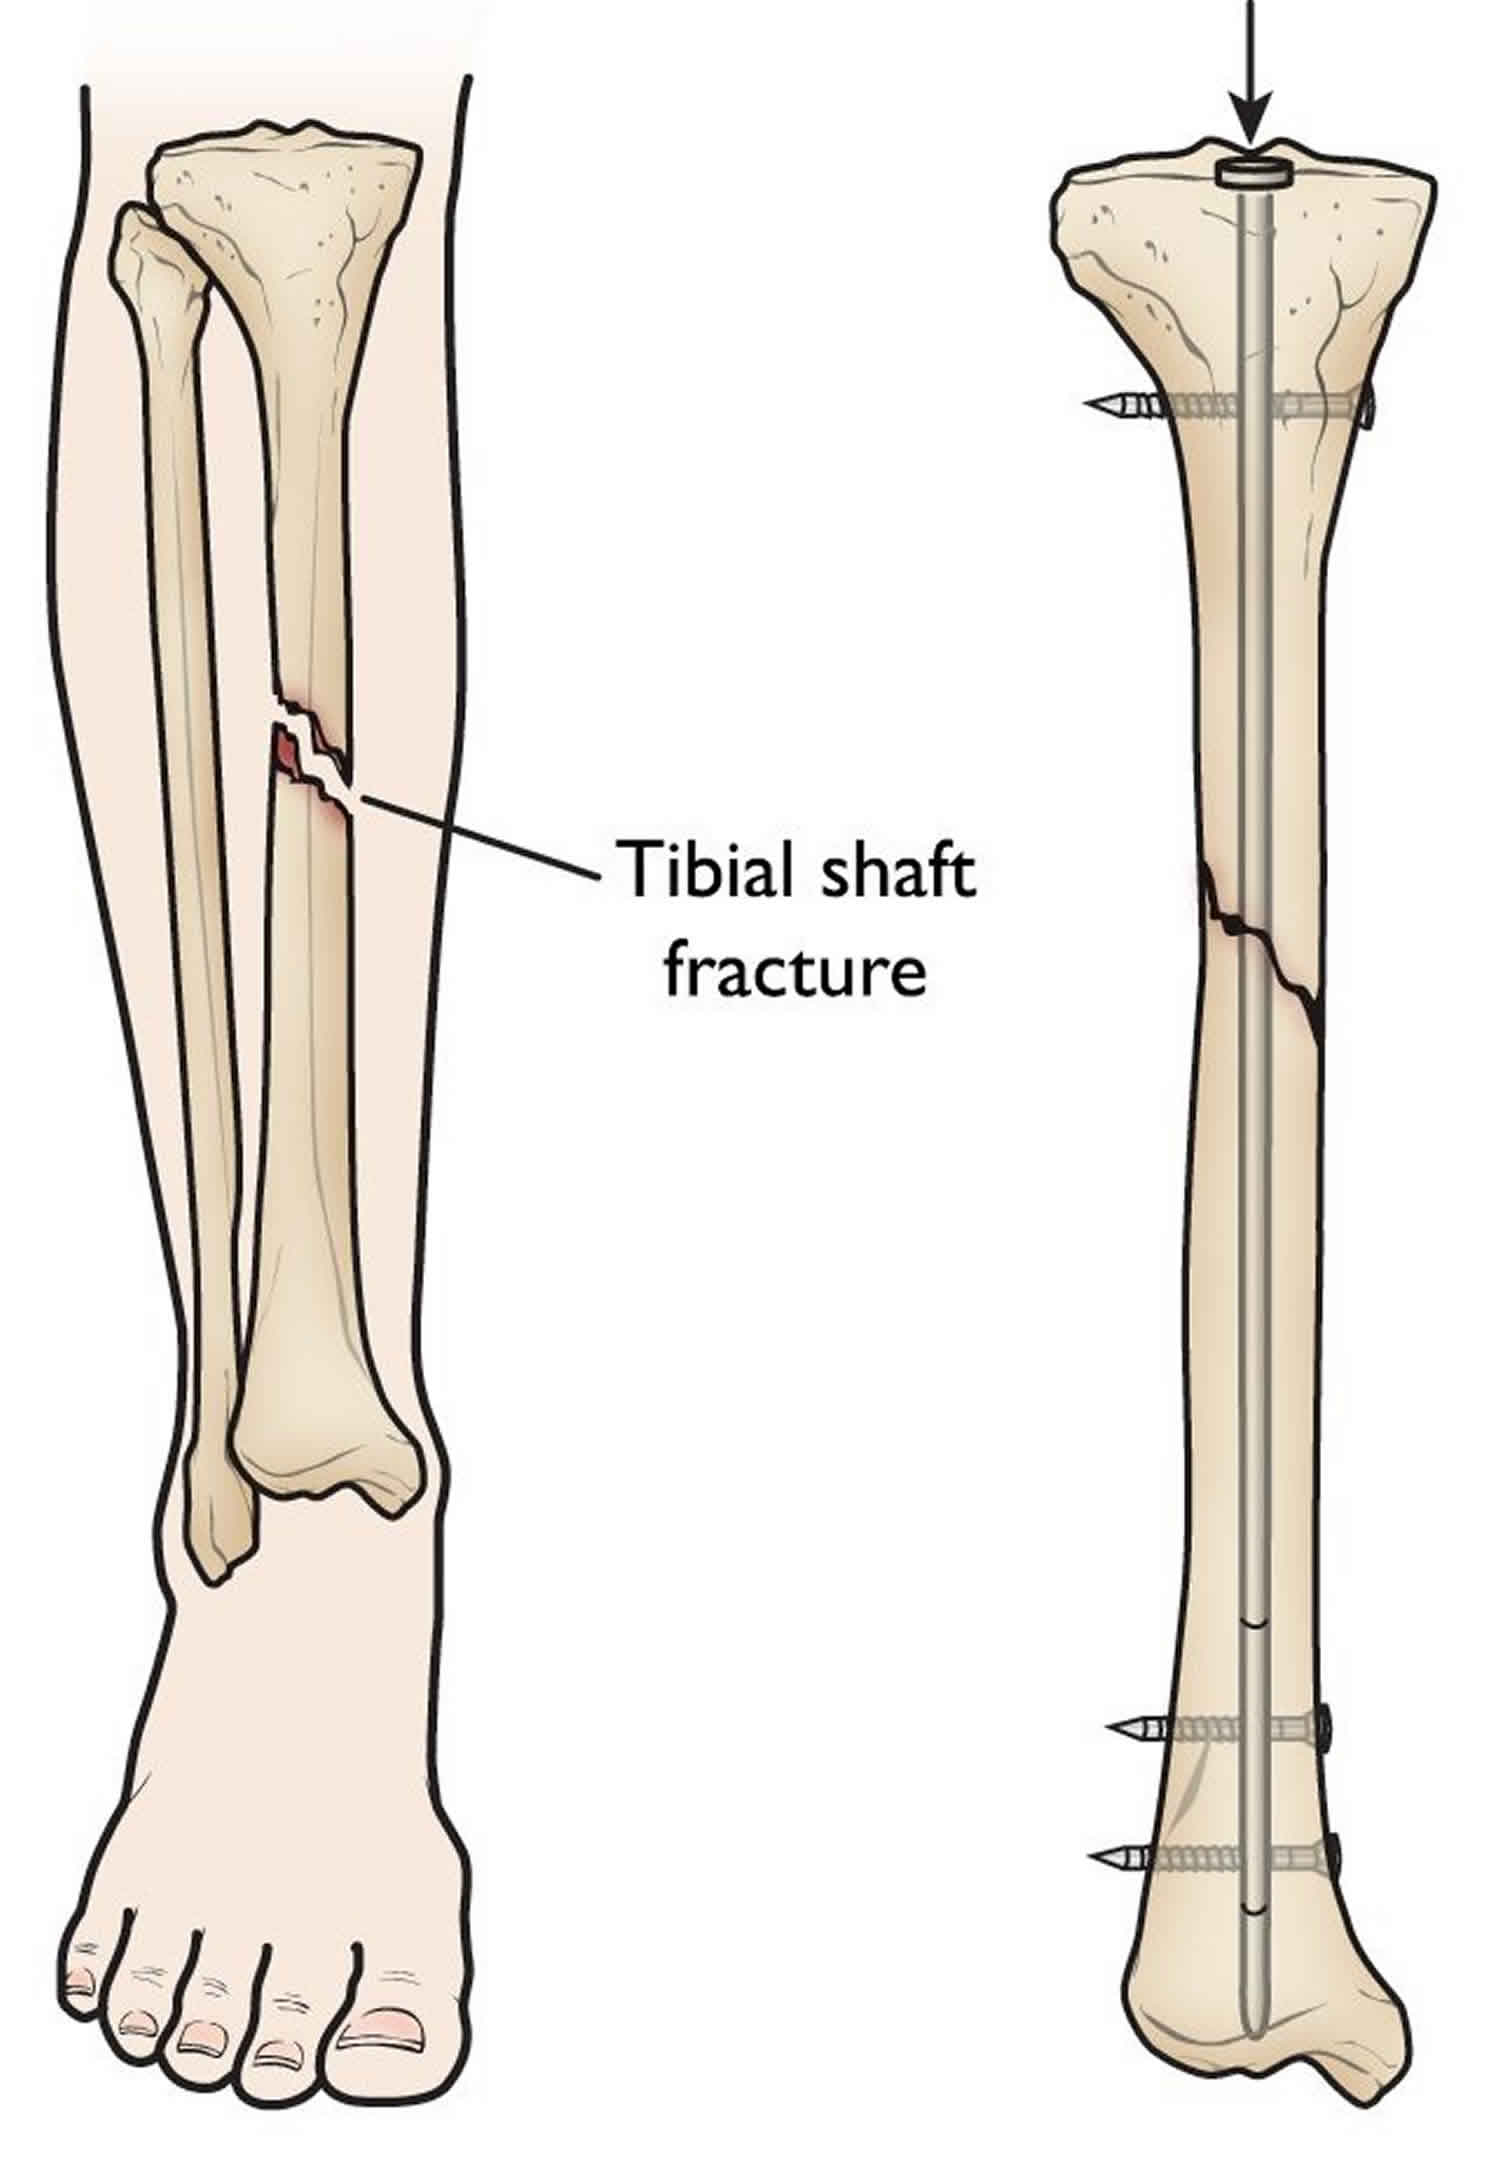 Tibial shaft fracture causes, types, symptoms, diagnosis ...